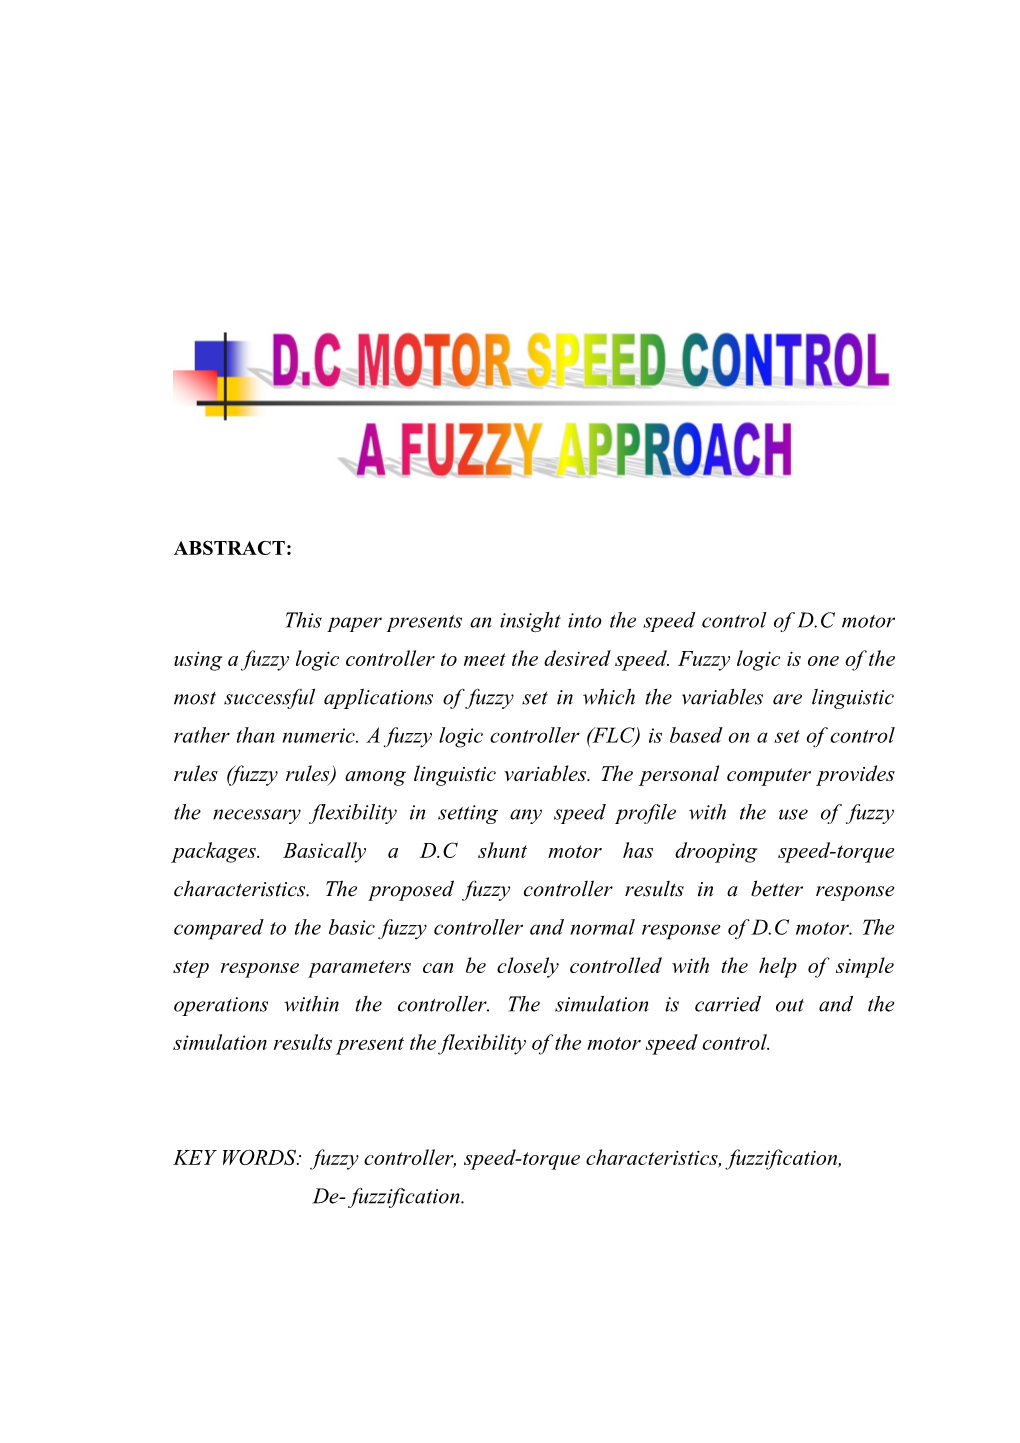 ABSTRACT: This Paper Presents an Insight Into the Speed Control of D